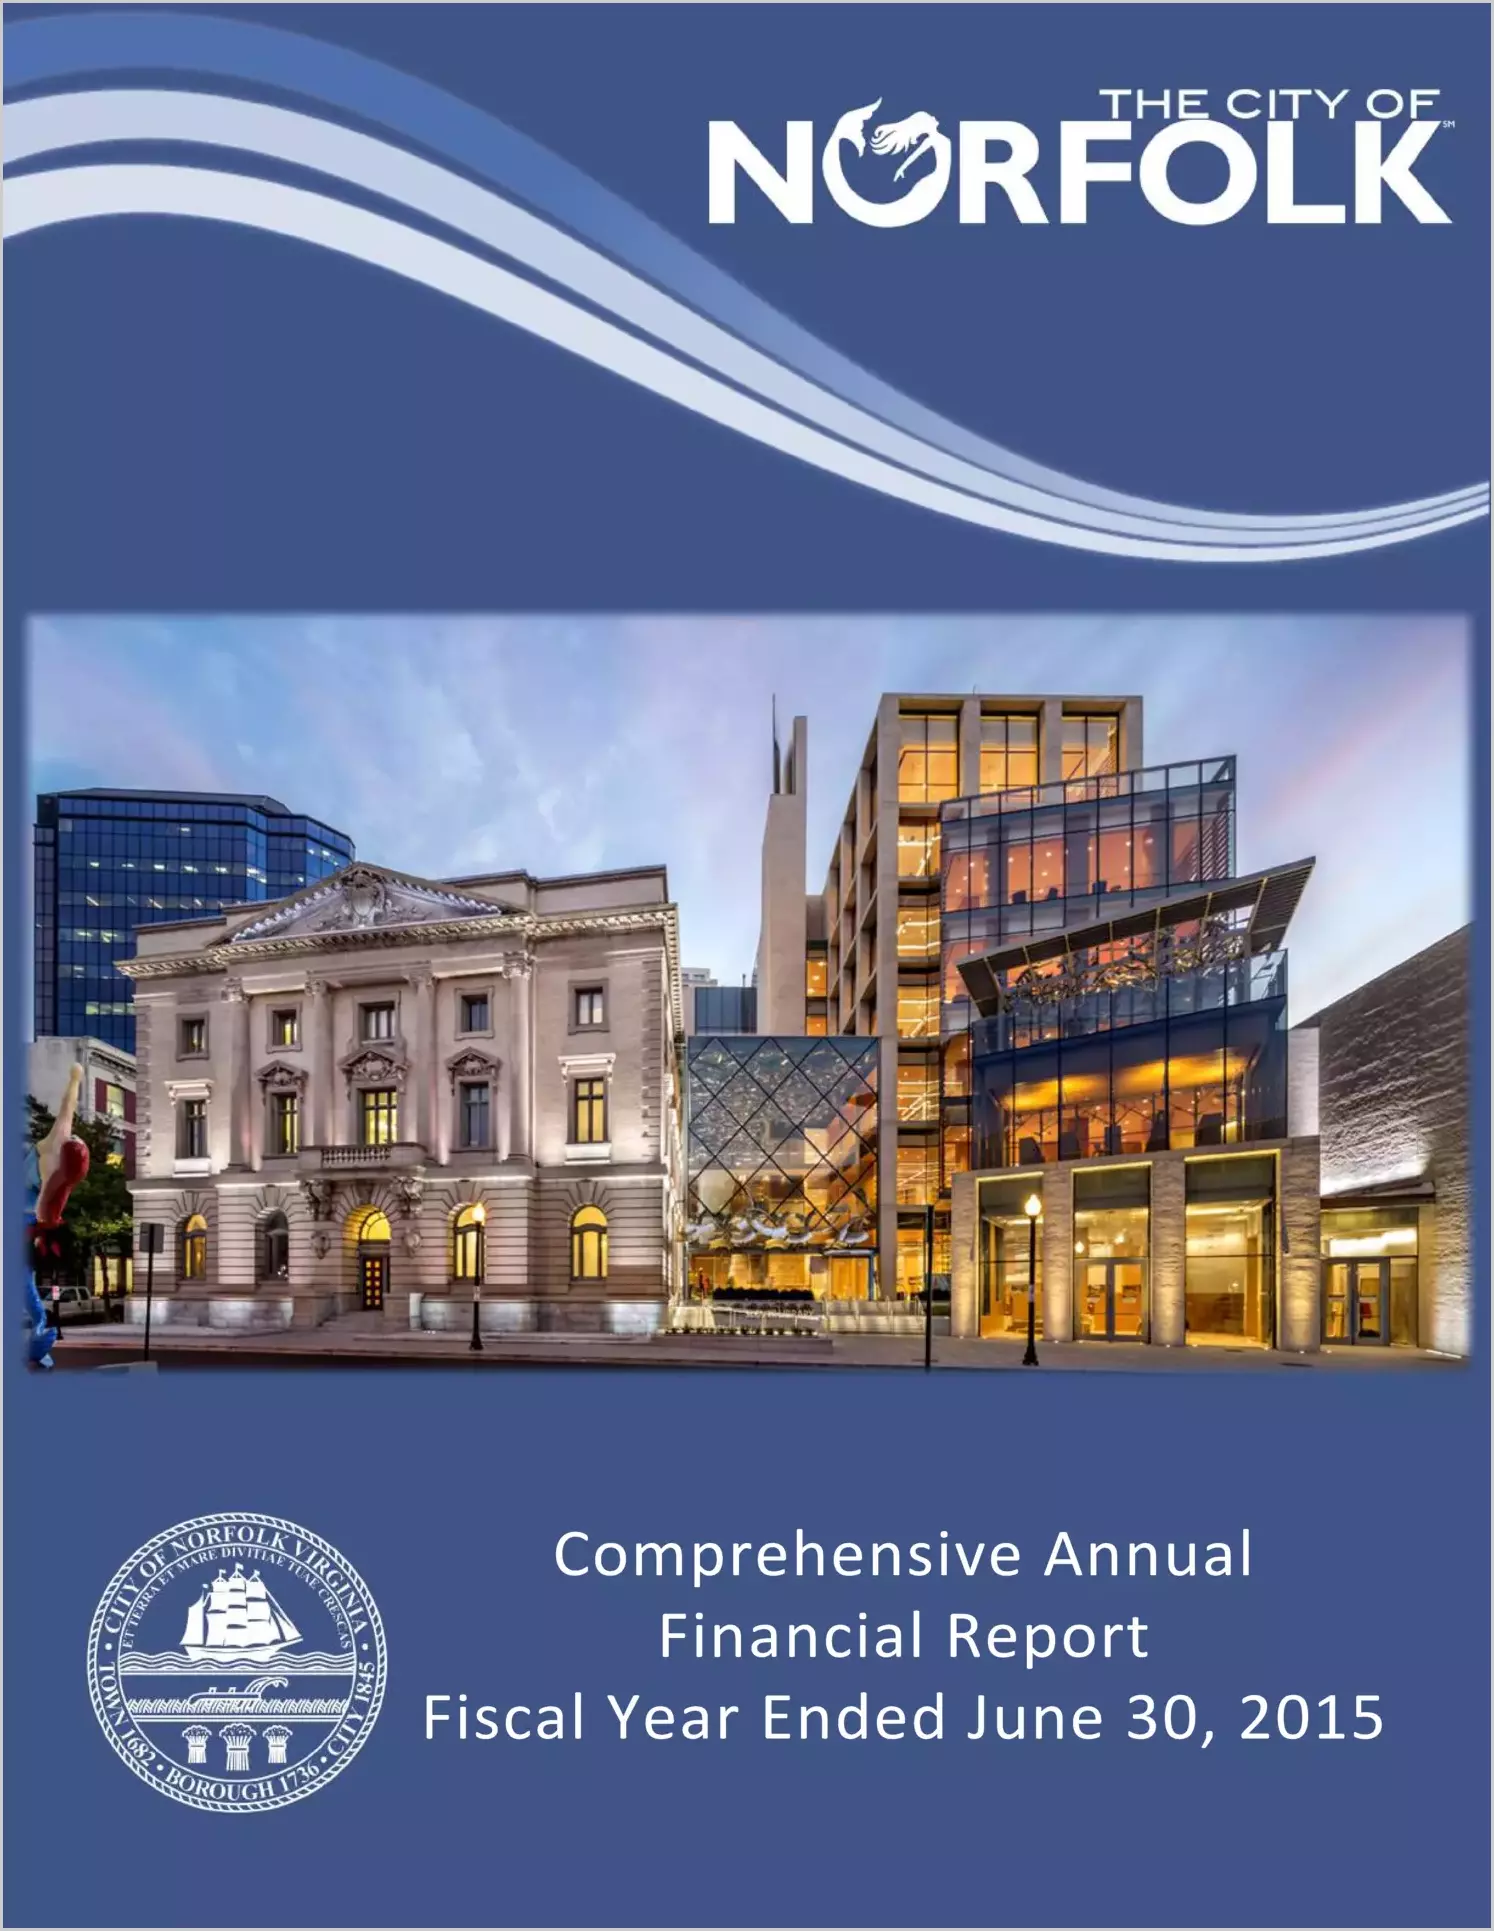 2015 Annual Financial Report for City of Norfolk